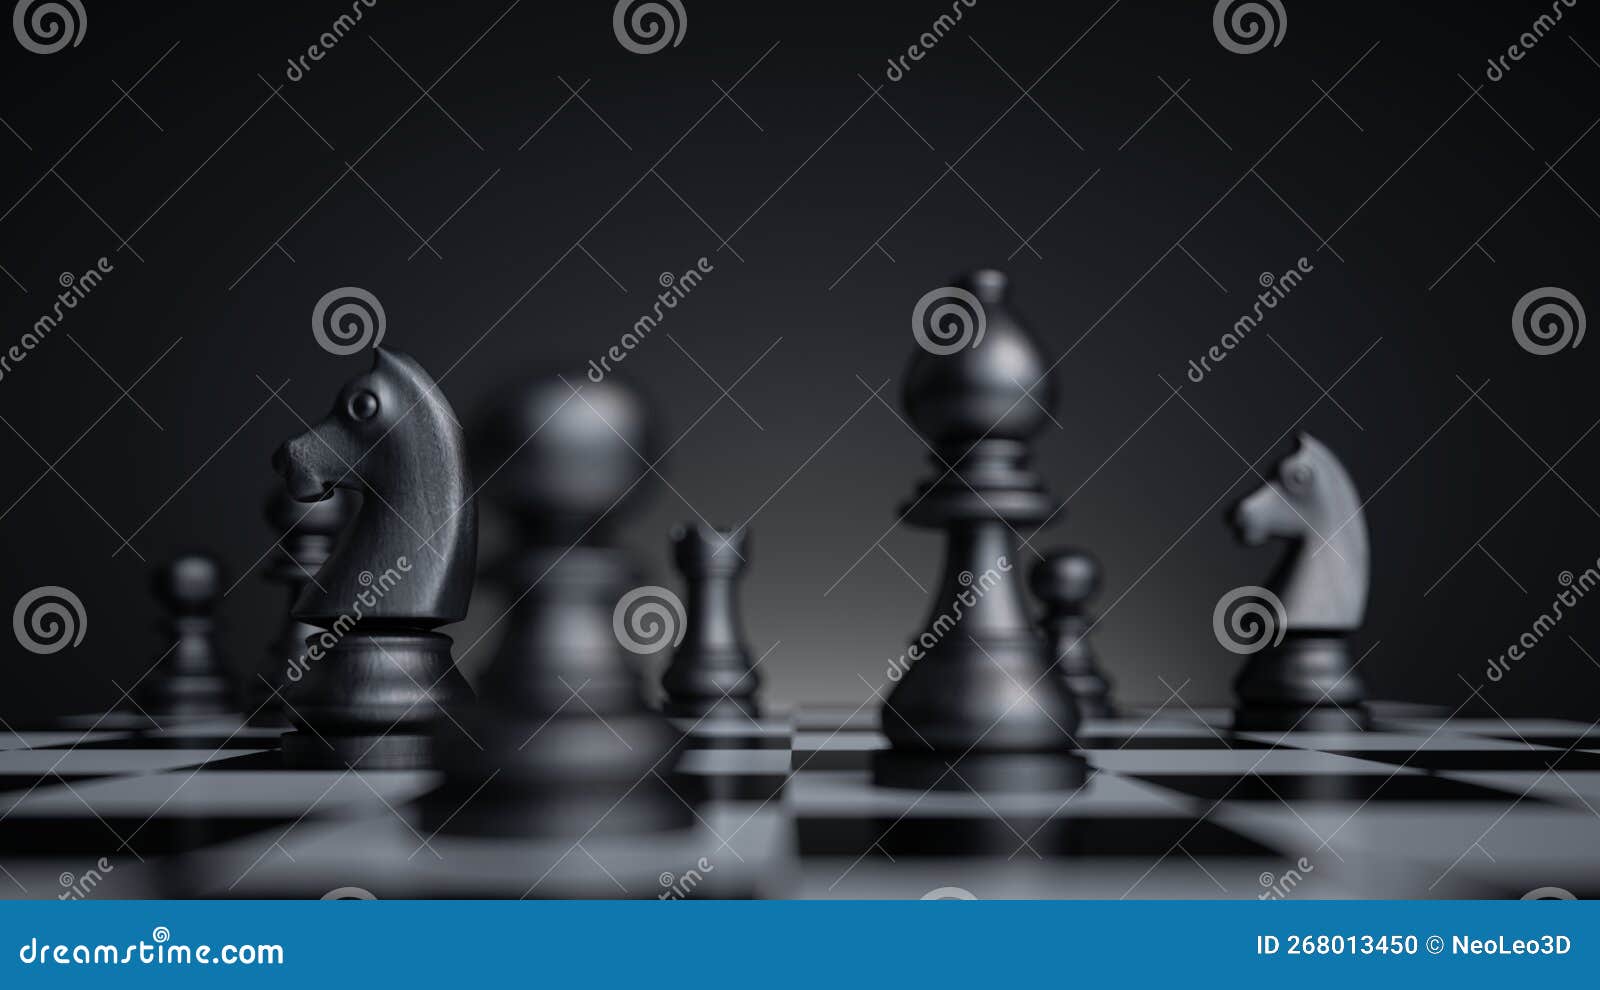 Group Of Chess Pieces Stand On A Black Chessboard Background, 3d